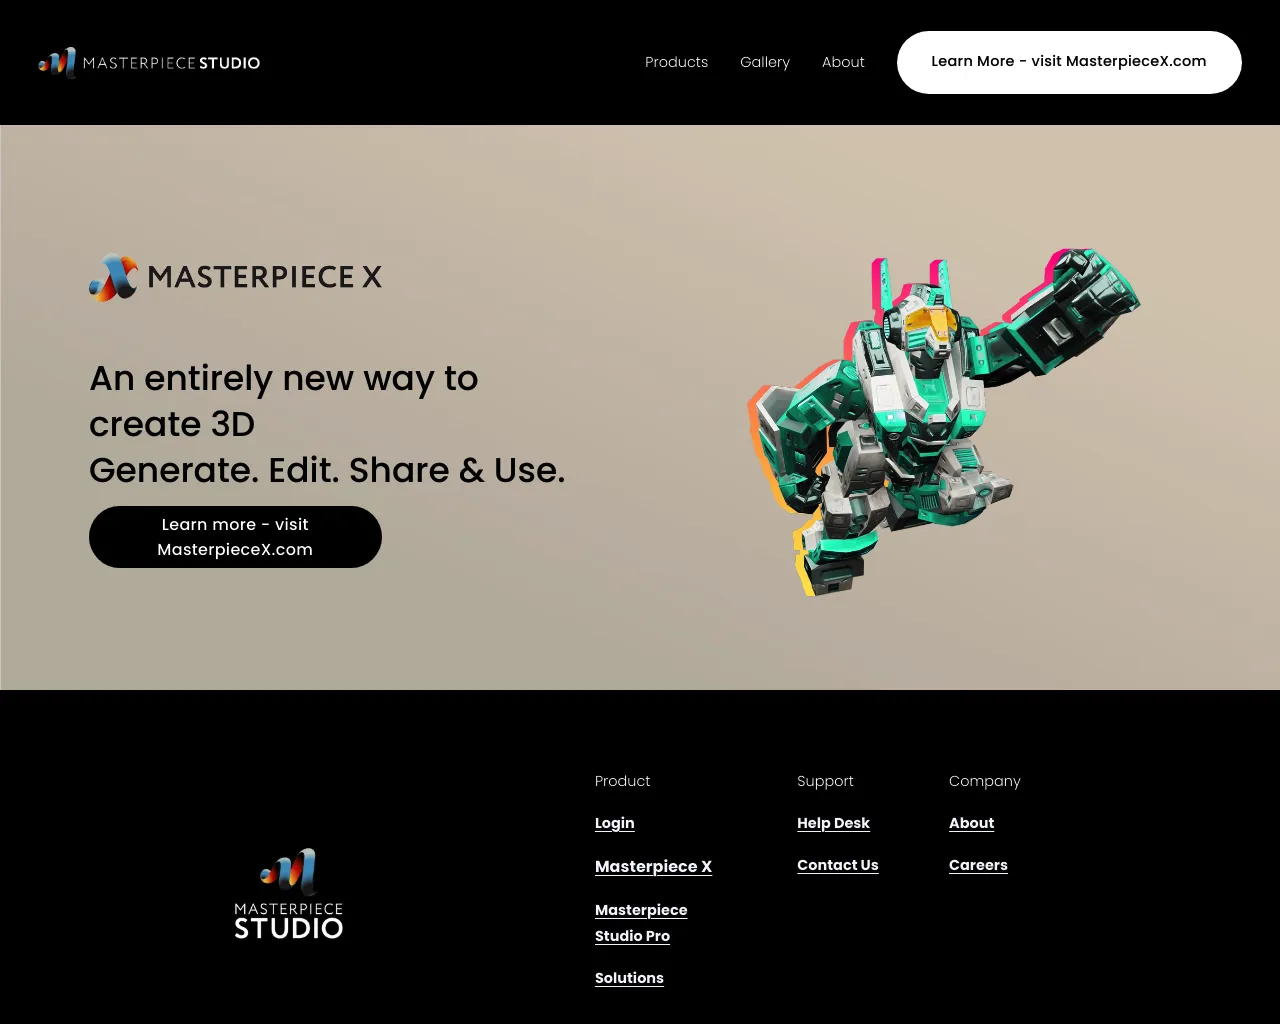 Masterpiece Studio - An entirely new way to create 3D